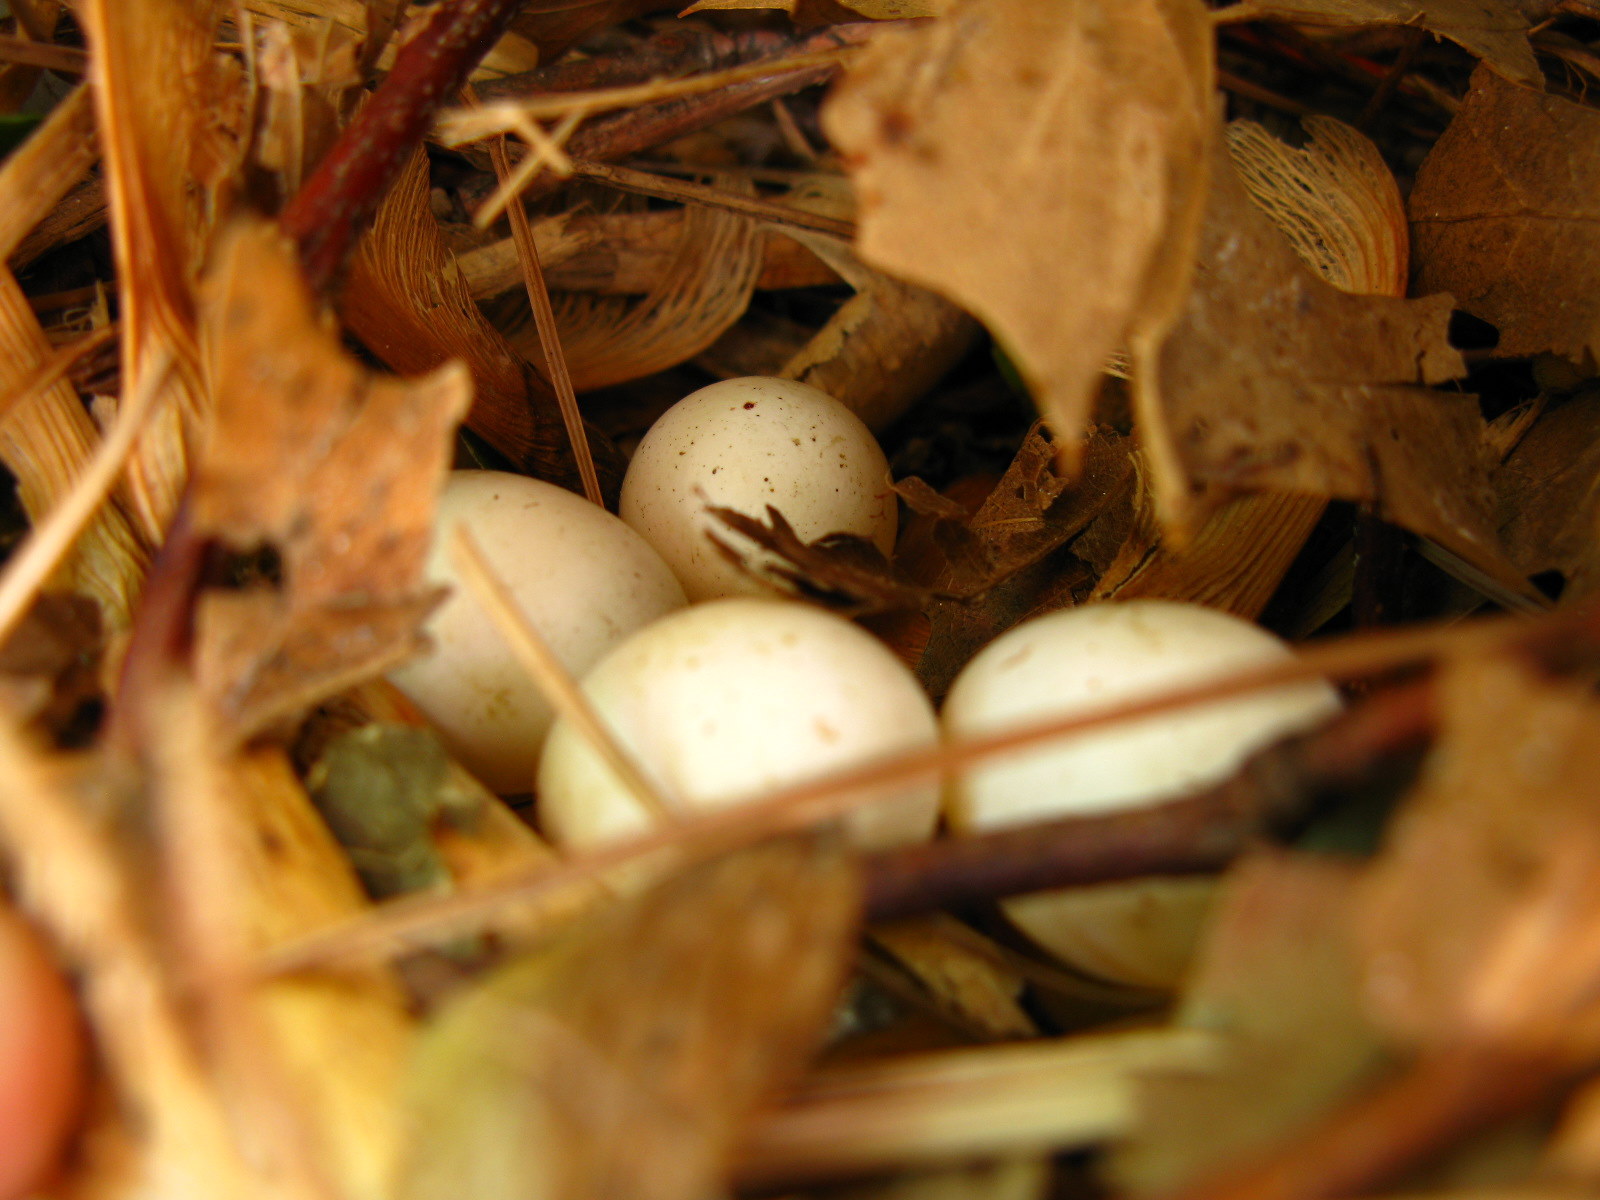 a pile of birds eggs with leaf on the ground